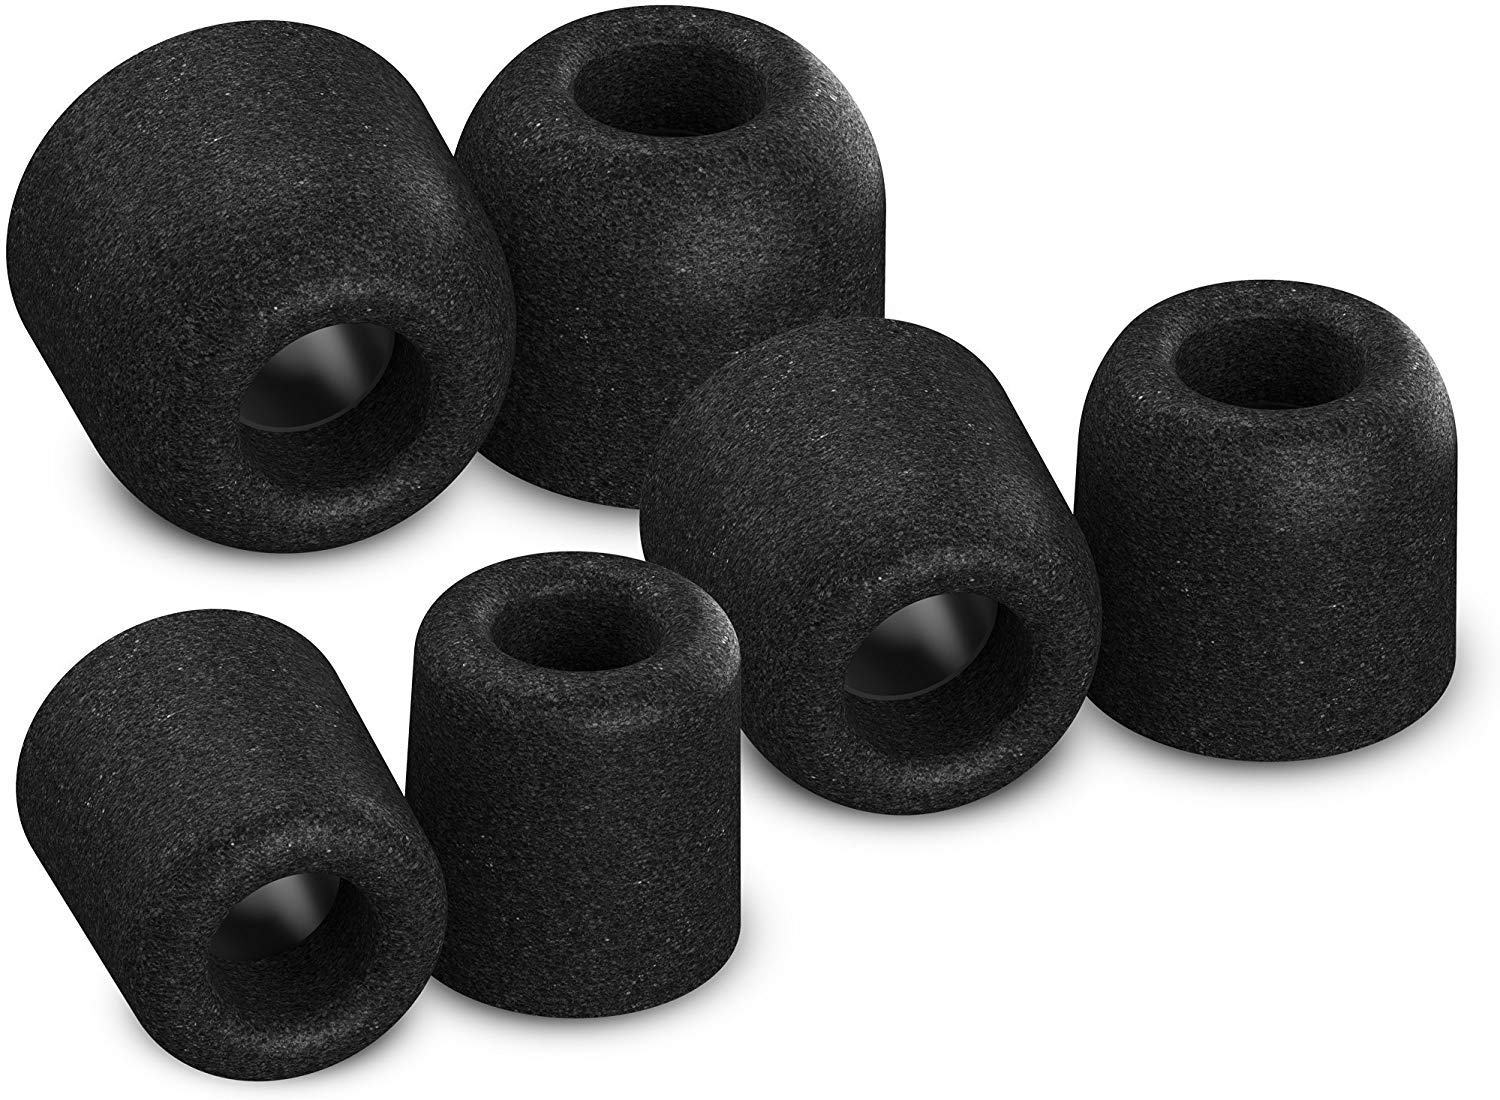 COMPLY T-500 Memory Foam Replacement Earbud Tips For KZ ZS10, ZSN, AS10, ZSX, STARFIELD, FH7, FIIO, MOONDROP And More Earphones (Assorted, 3 Pairs)